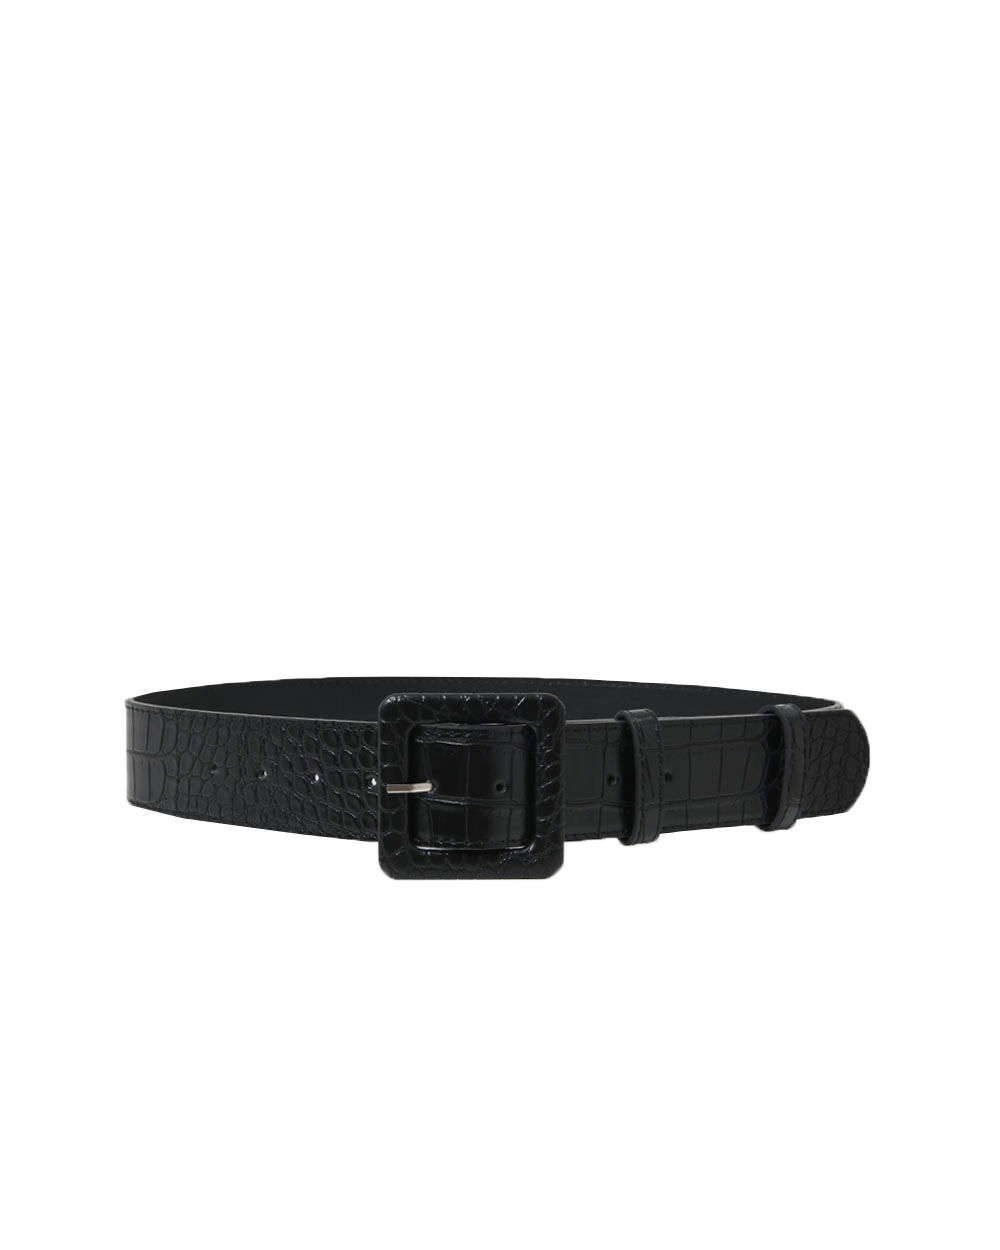 Bree Croc Covered Buckle Belt